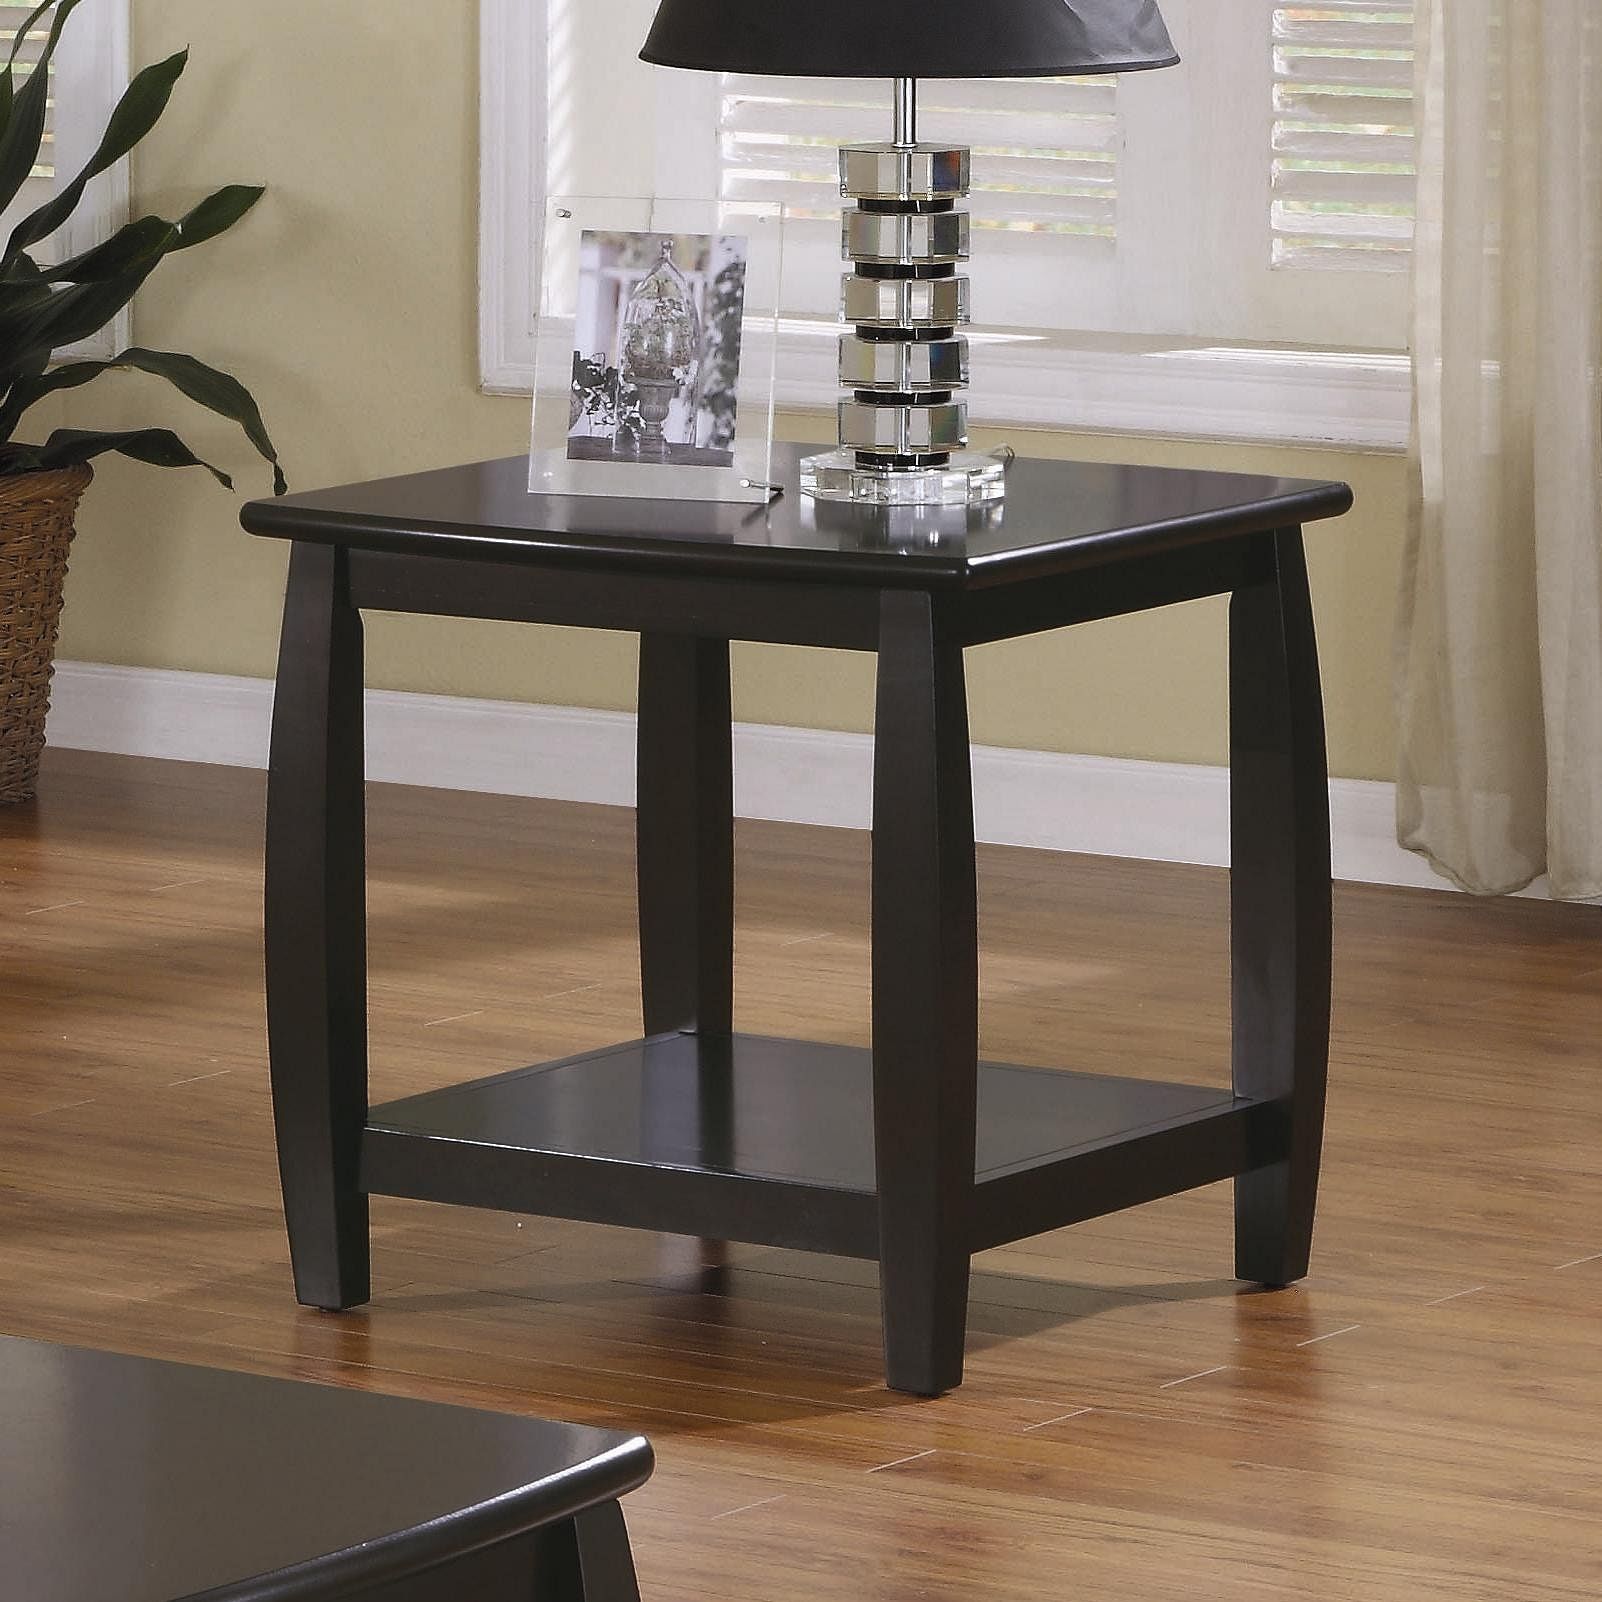 Coaster Living Room End Table 701077